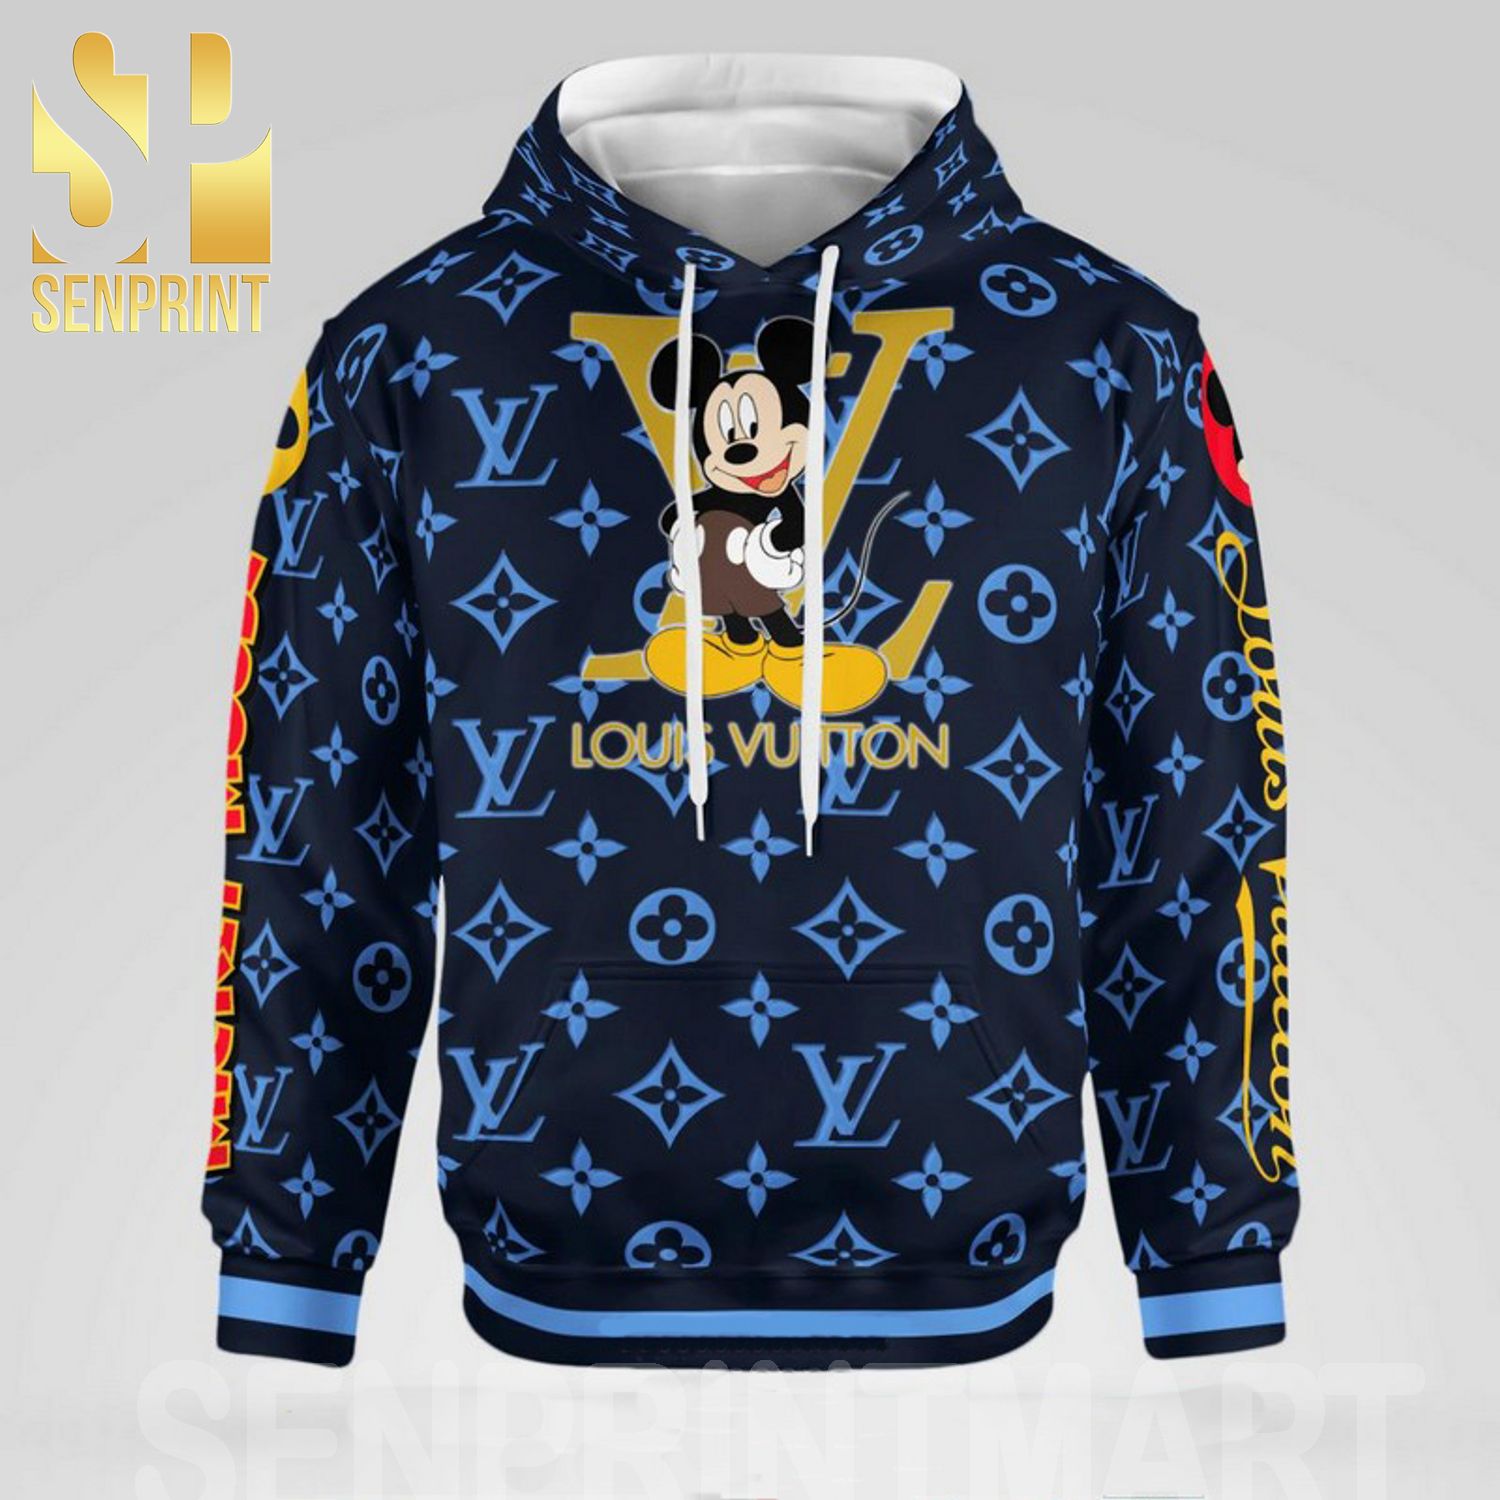 Louis Vuitton Mickey Mouse Classic Symbol Pattern Full Printing Shirt